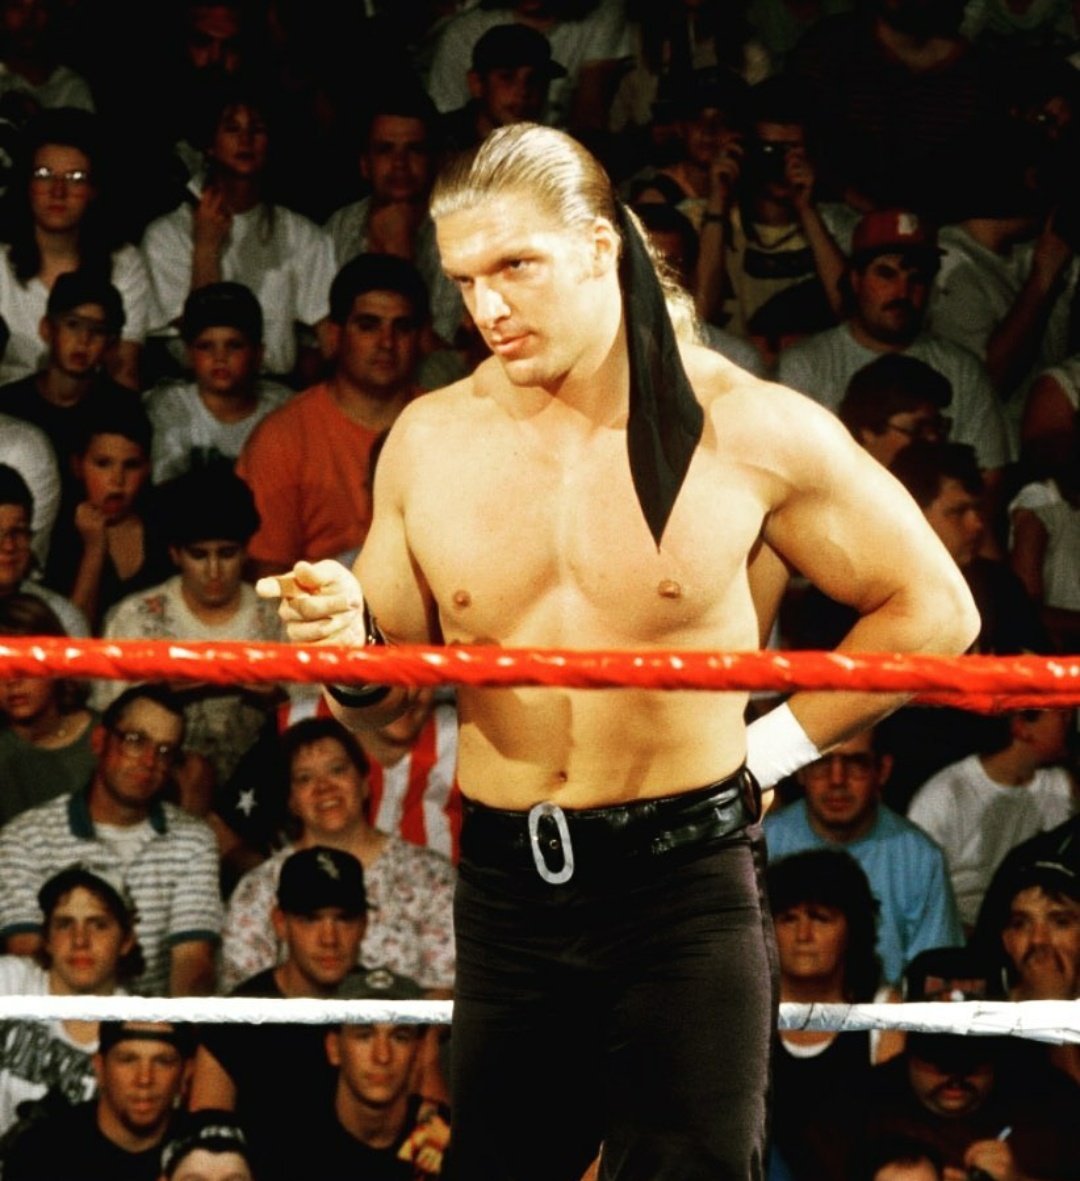 29 years ago today, Hunter Hearst Helmsley made his WWE debut. @TripleH